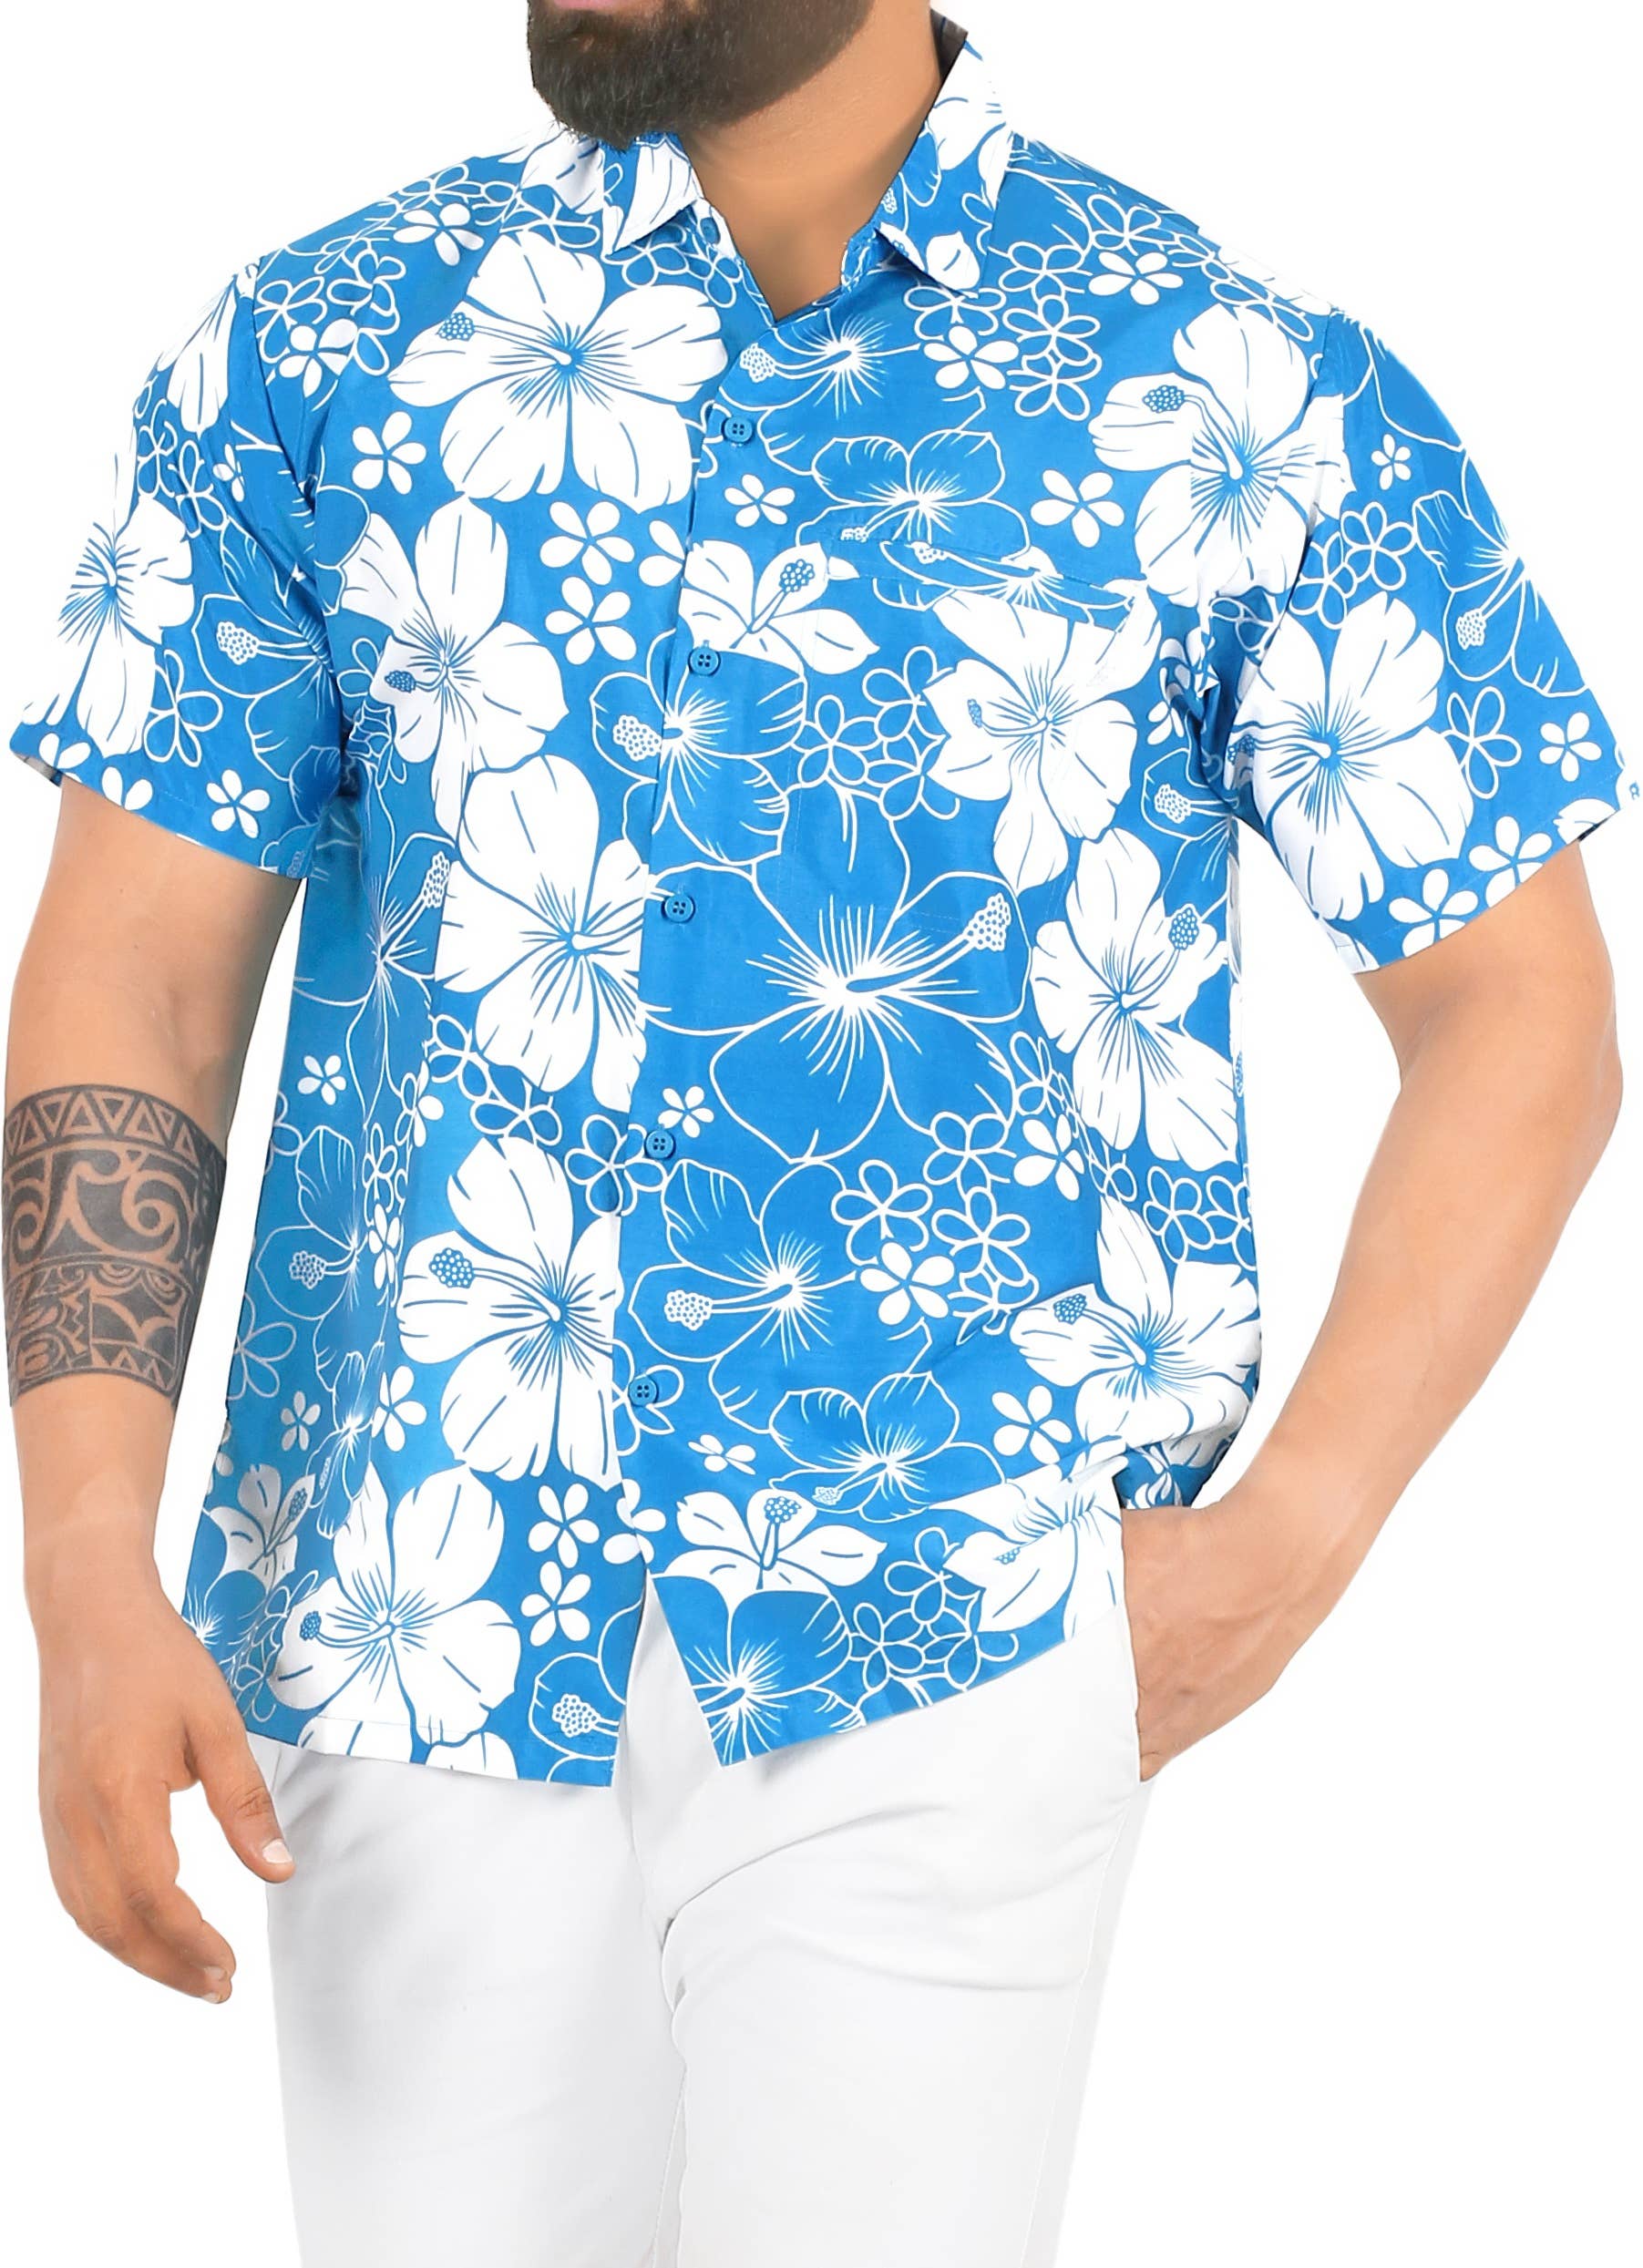 Under Armour White Blue Floral Combo Hawaiian Shirt Shorts and